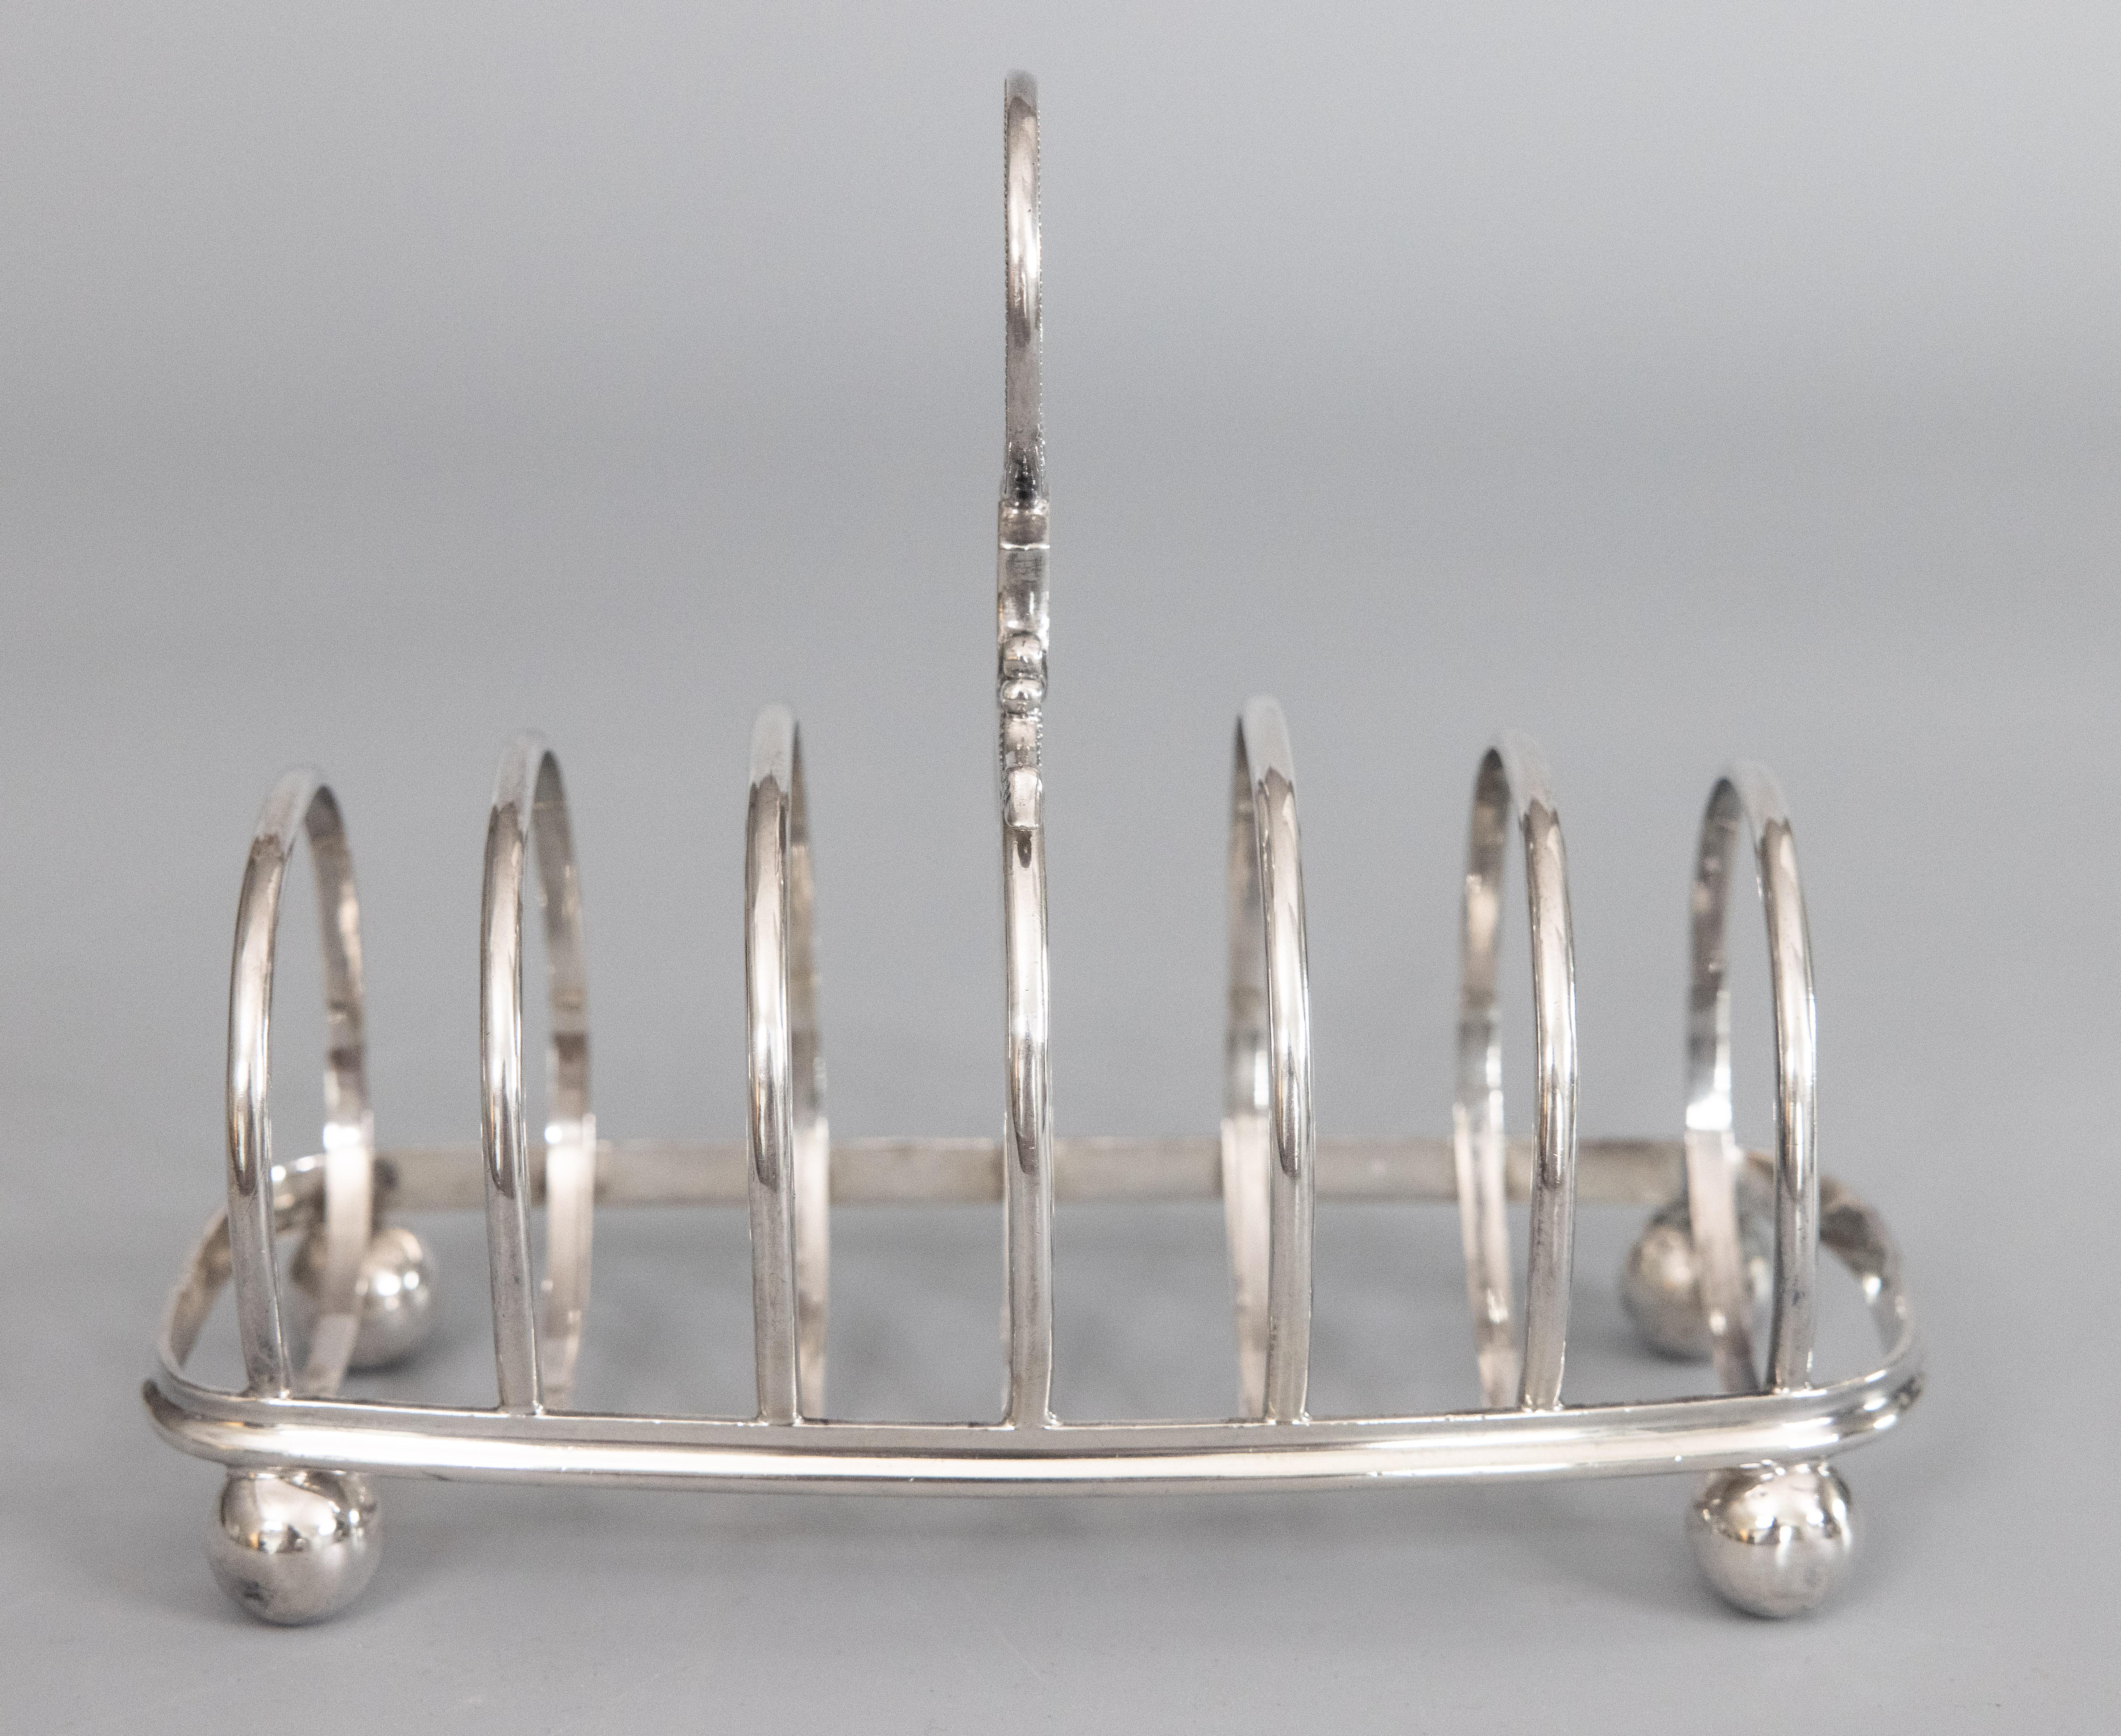 A fine antique English Art Deco silverplate six slot toast rack. Hallmarks on rim. This stunning toast rack has a sleek and stylish barrel shaped geometric design, beaded finial, and charming ball feet. It's a nice large size, perfect for serving